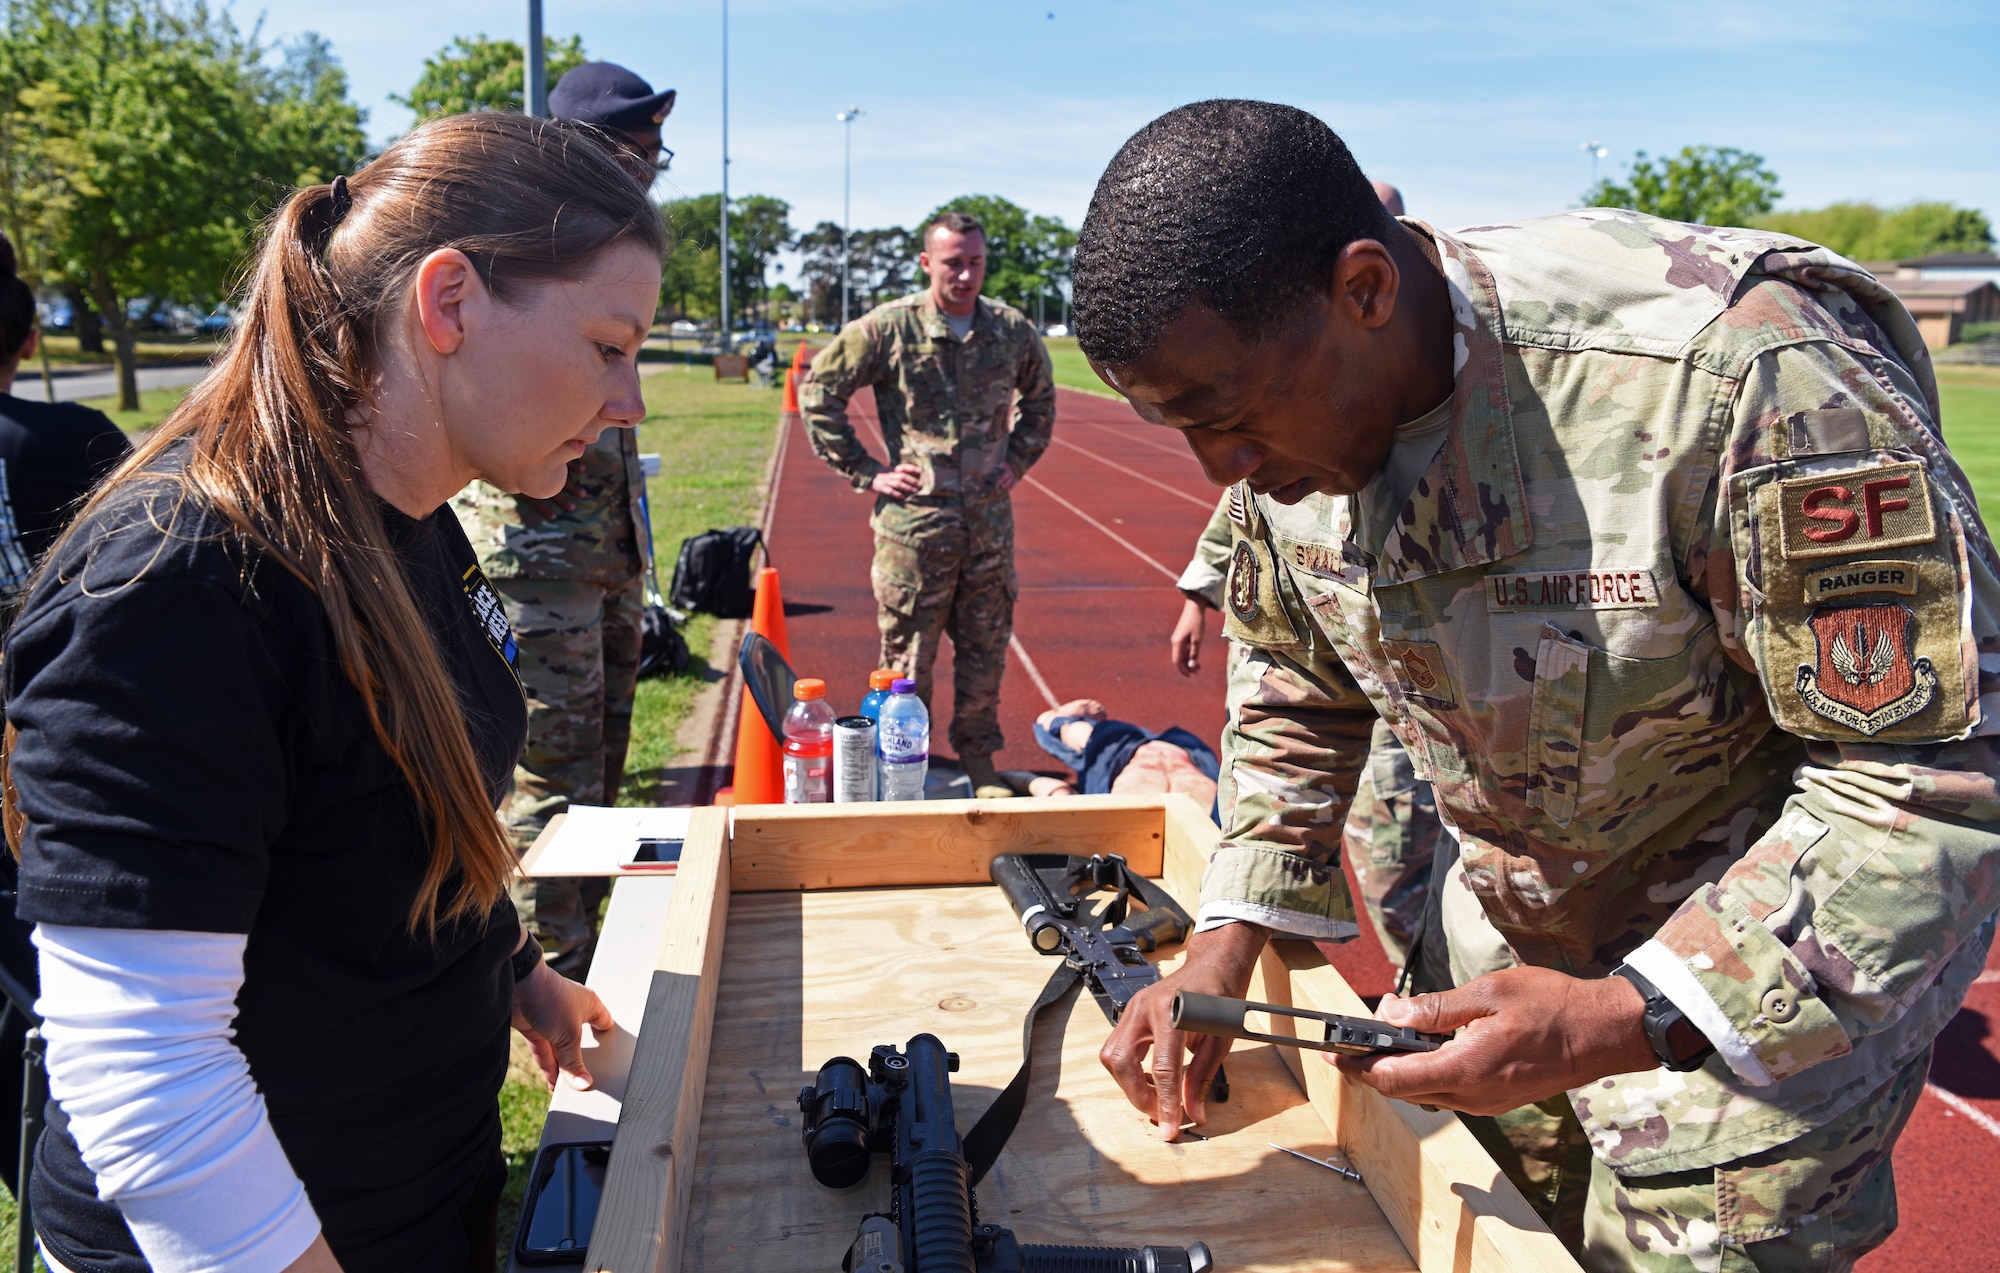 U.S. Air Force Chief Master Sgt. Micah Small, 100th Security Forces Squadron superintendent, assembles an M-4 during the 48th Security Forces Squadron’s “Spartan Race” at RAF Lakenheath, England, May 14, 2019. The “Spartan Race” is part of the week-long National Police Week recognition, in which both squadrons held events May 13-17. (U.S. Air Force photo by Airman 1st Class Brandon Esau)